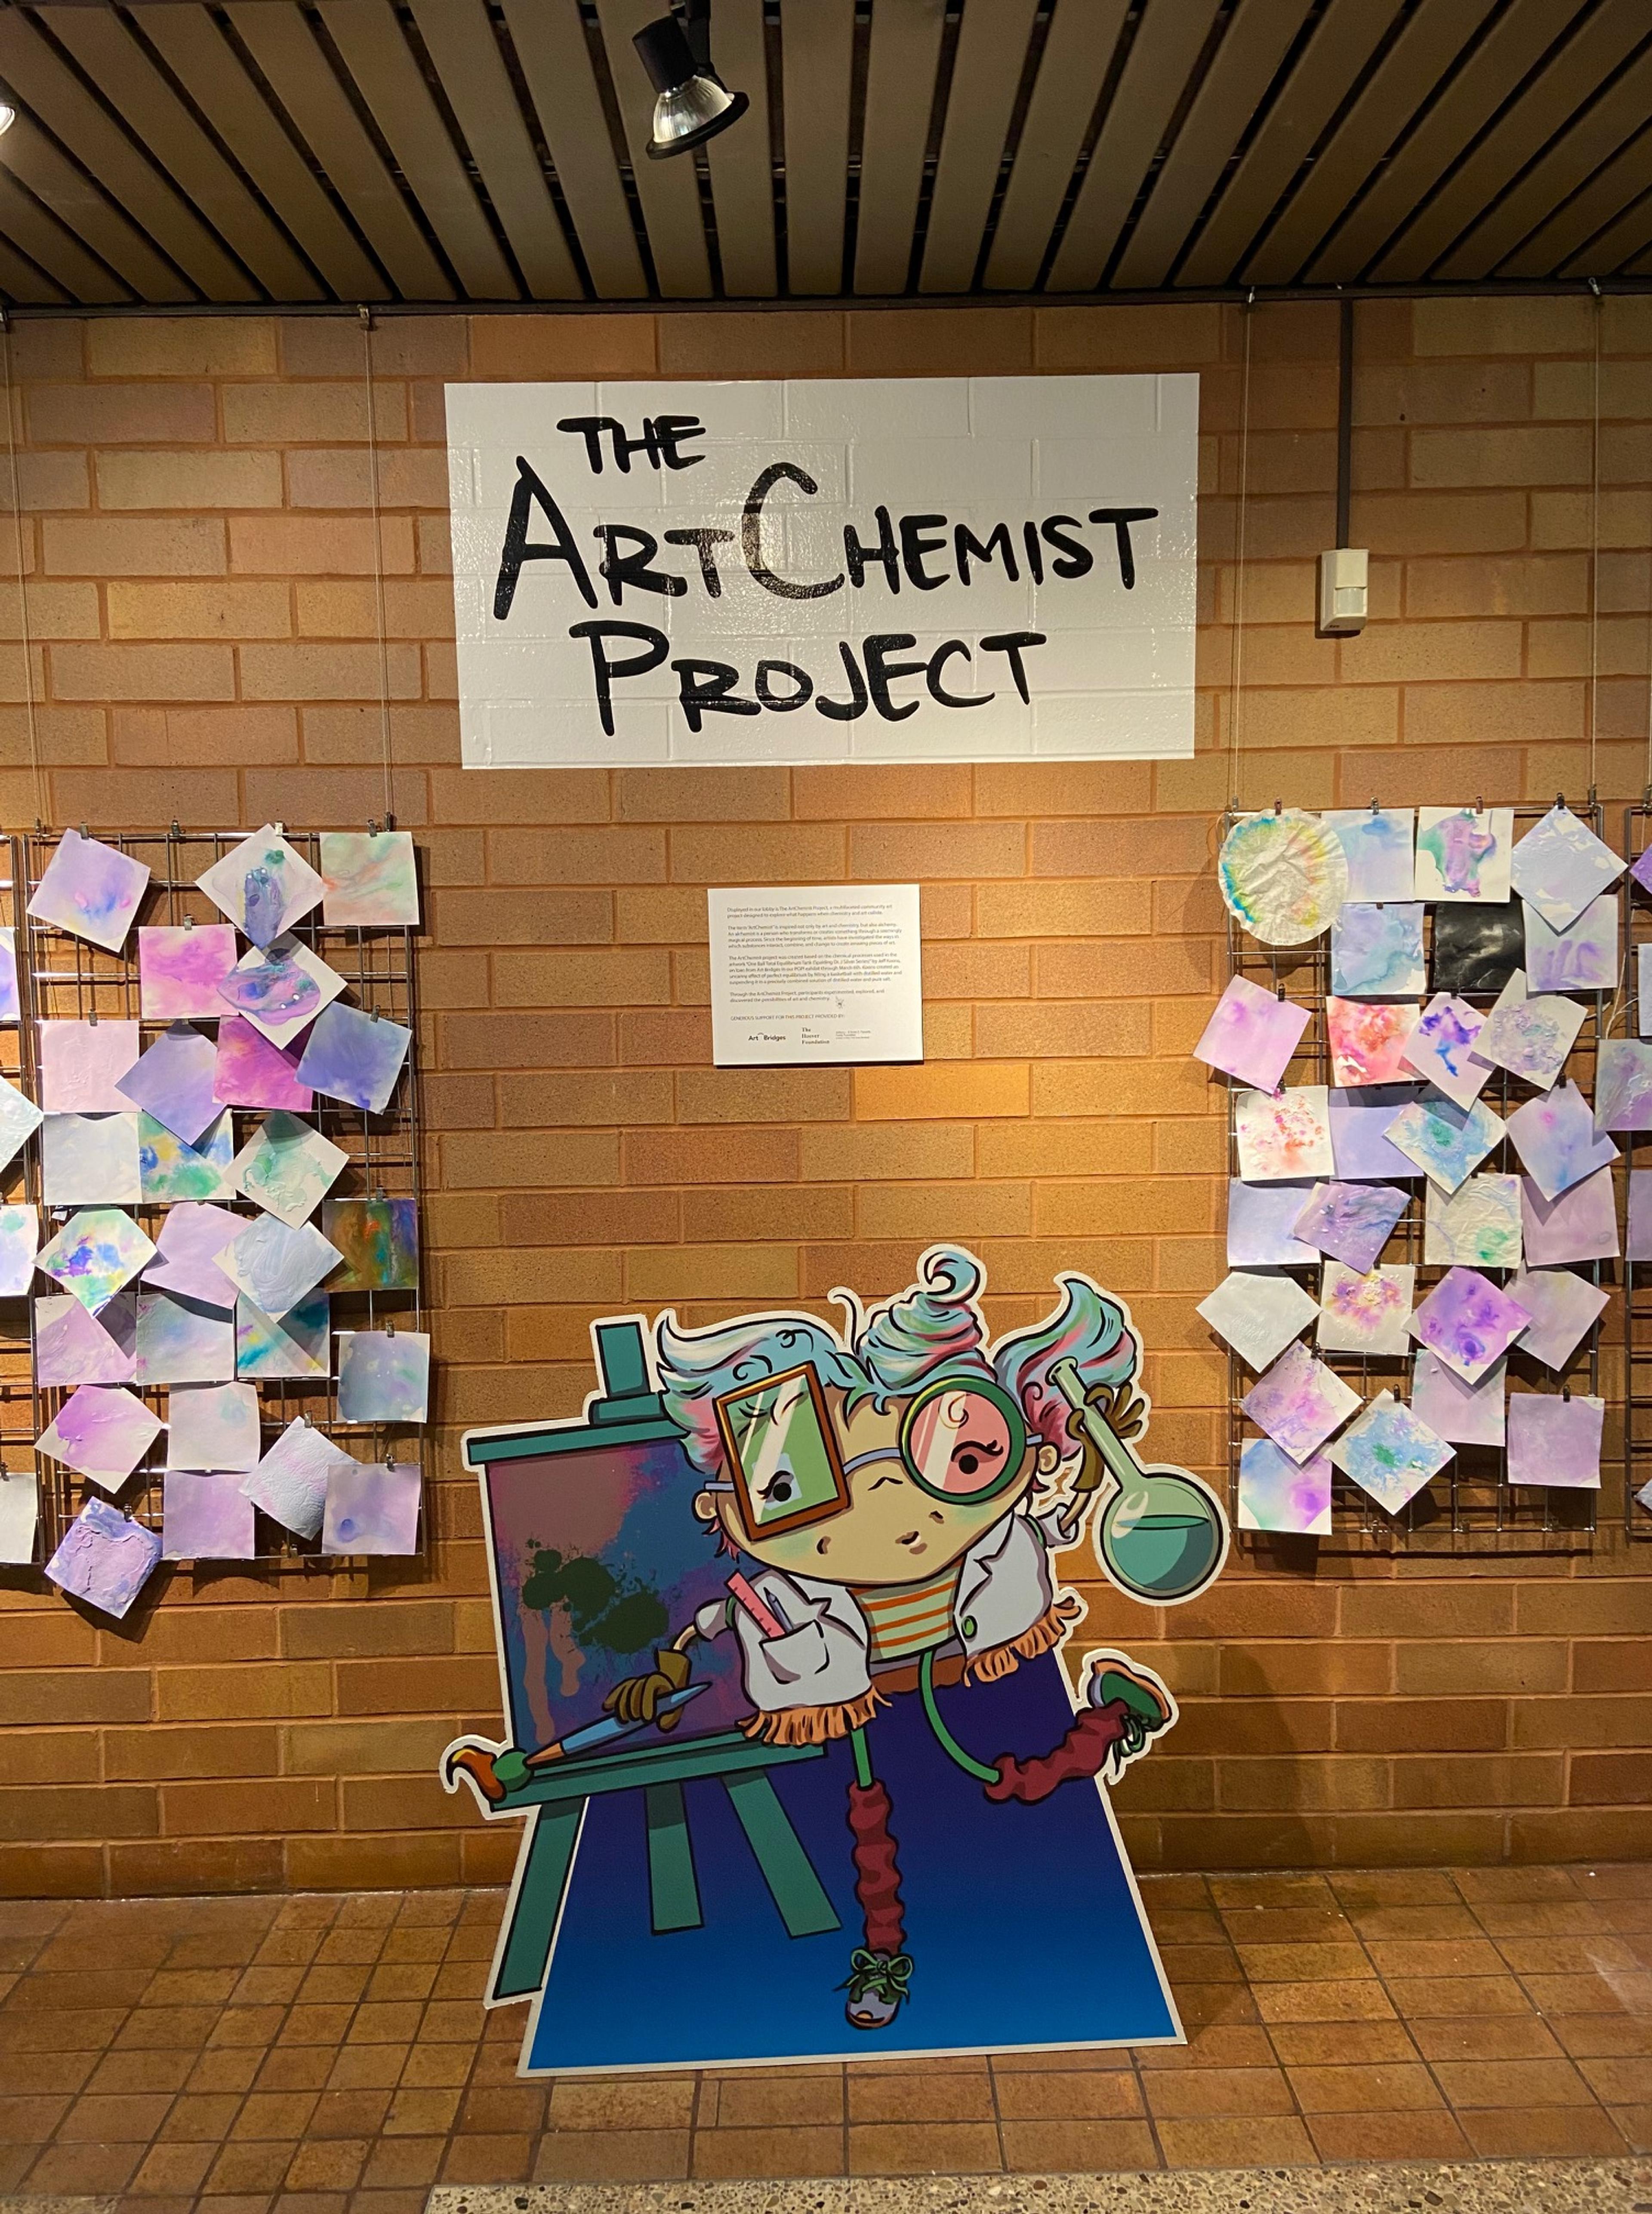 Art Chemist Project display at the Canton Museum of Art